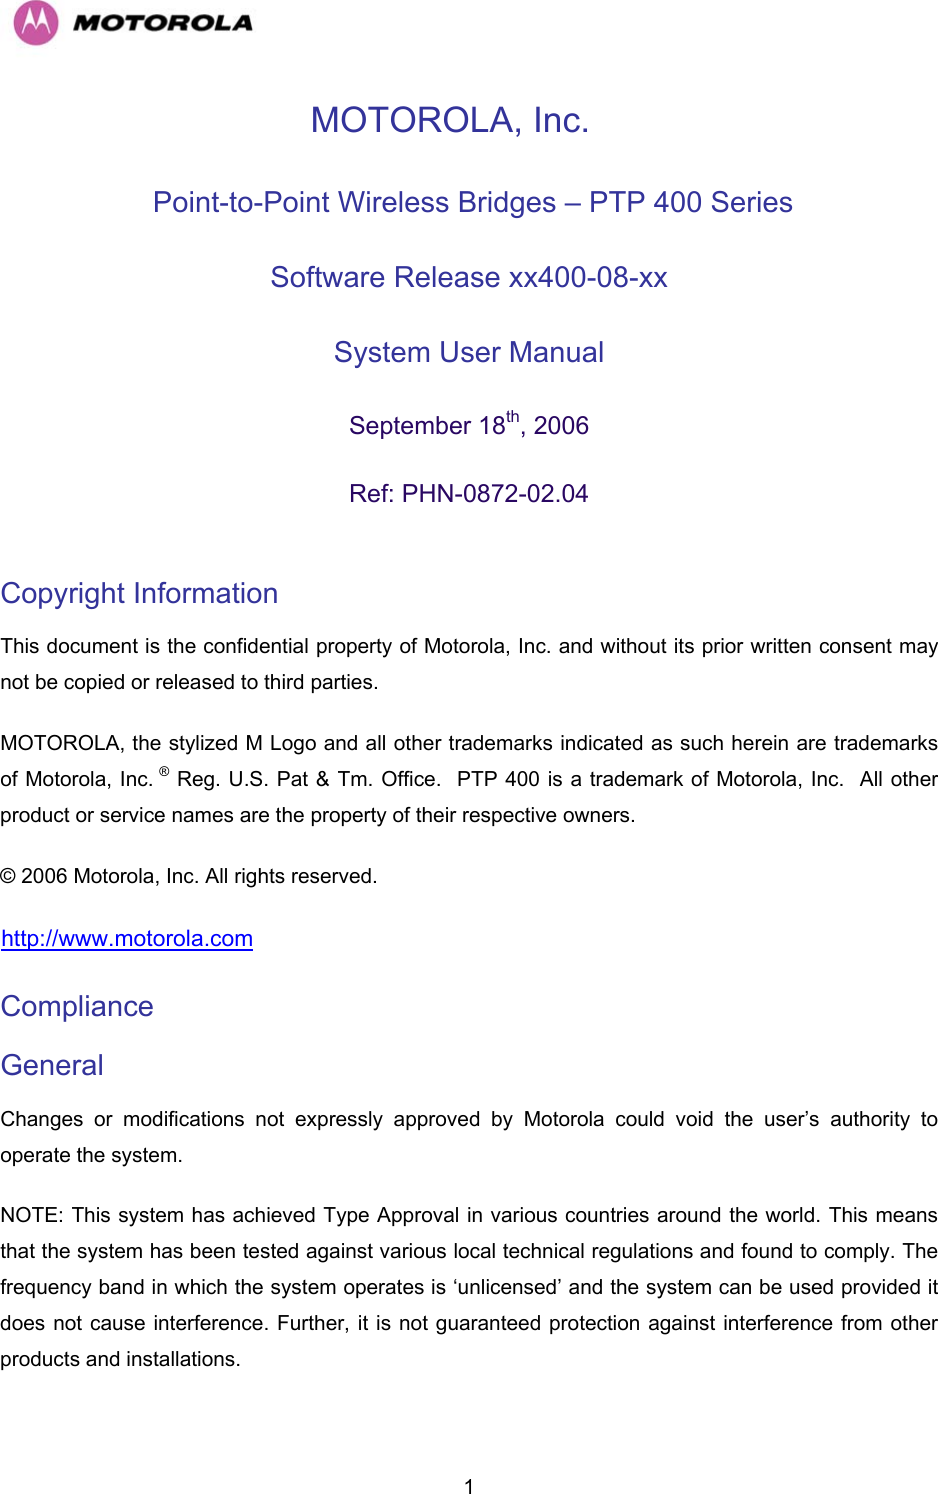   1MOTOROLA, Inc.  Point-to-Point Wireless Bridges – PTP 400 Series Software Release xx400-08-xx  System User Manual  September 18th, 2006 Ref: PHN-0872-02.04  Copyright Information  This document is the confidential property of Motorola, Inc. and without its prior written consent may not be copied or released to third parties.  MOTOROLA, the stylized M Logo and all other trademarks indicated as such herein are trademarks of Motorola, Inc. ® Reg. U.S. Pat &amp; Tm. Office.  PTP 400 is a trademark of Motorola, Inc.  All other product or service names are the property of their respective owners. © 2006 Motorola, Inc. All rights reserved. Hhttp://www.motorola.com Compliance  General Changes or modifications not expressly approved by Motorola could void the user’s authority to operate the system.  NOTE: This system has achieved Type Approval in various countries around the world. This means that the system has been tested against various local technical regulations and found to comply. The frequency band in which the system operates is ‘unlicensed’ and the system can be used provided it does not cause interference. Further, it is not guaranteed protection against interference from other products and installations. 